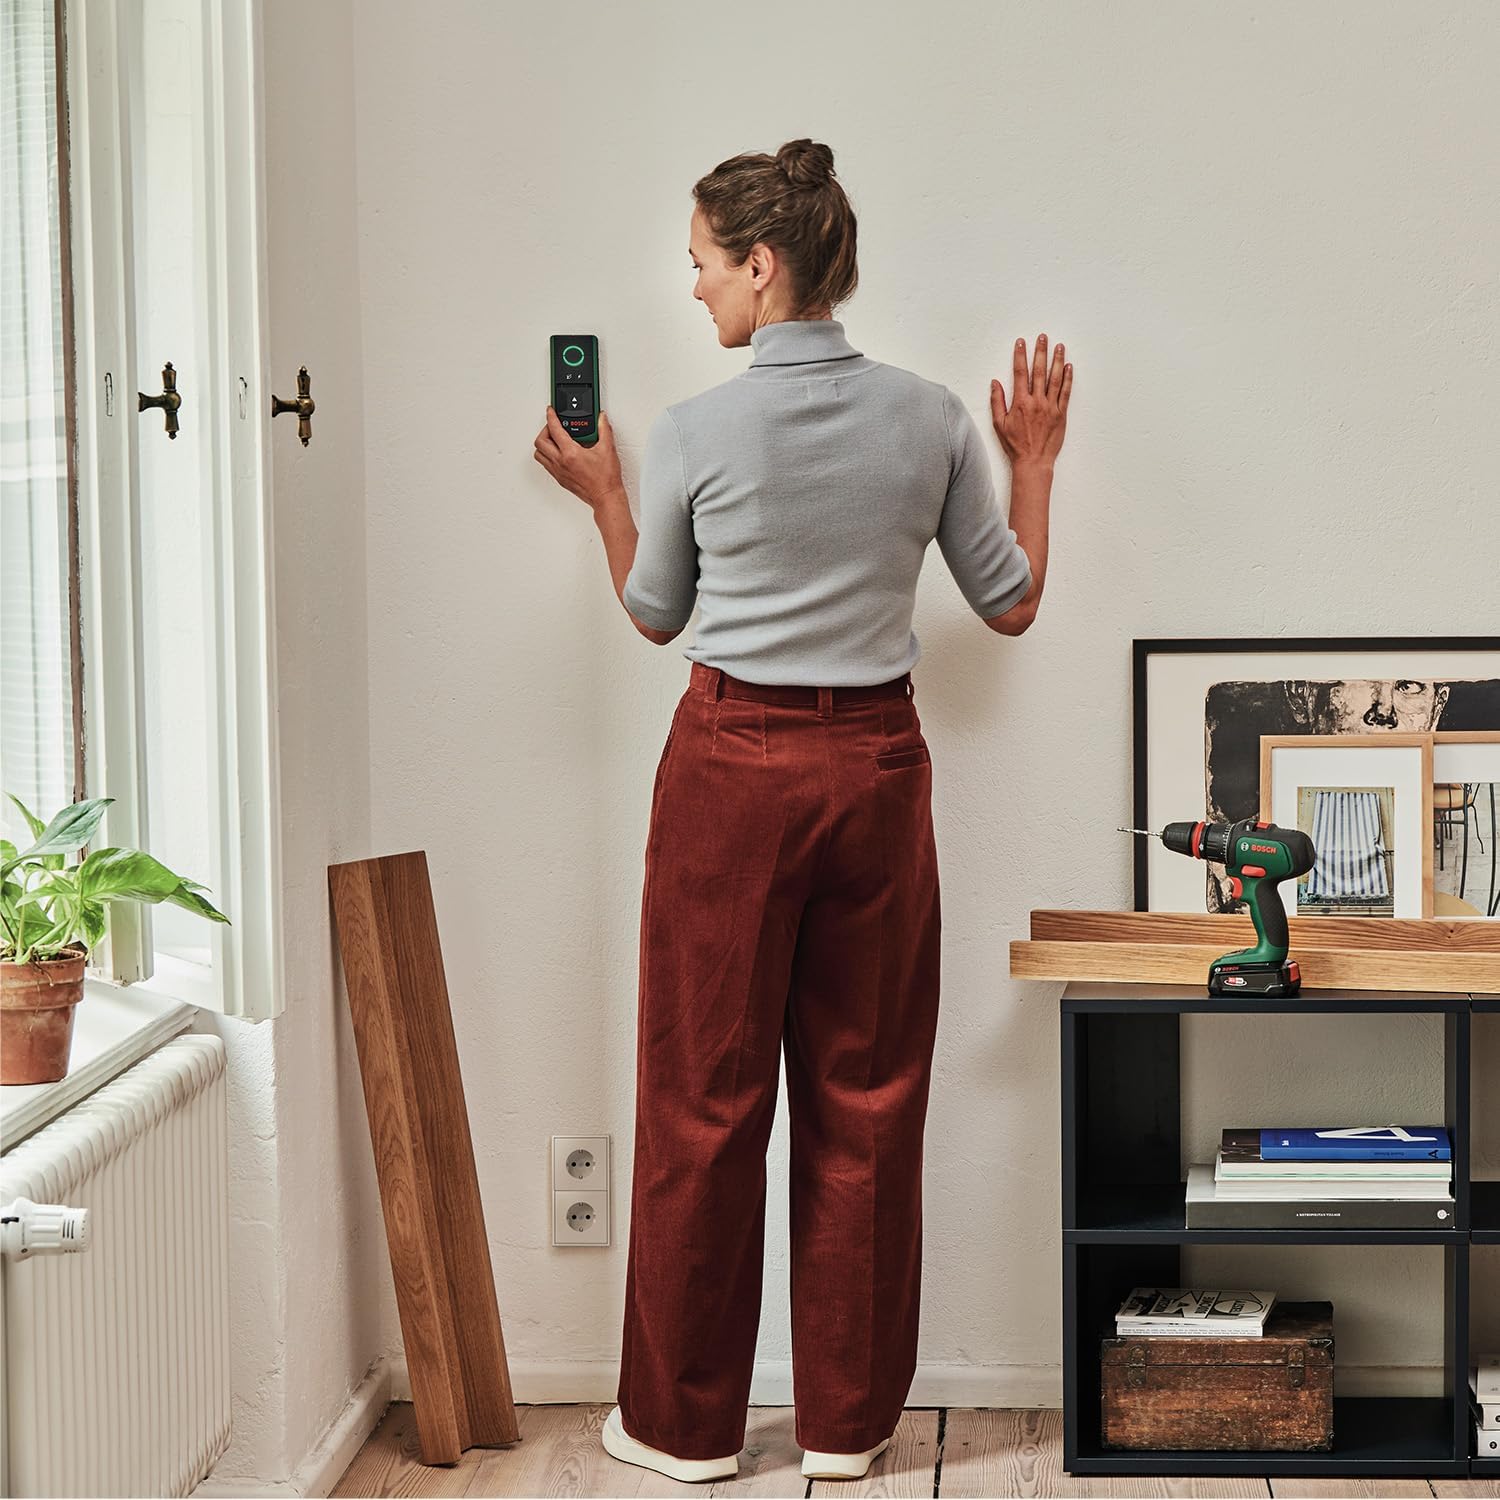 Bosch detector Truvo 2nd gen. (easy one-button handling, simple detection of live cables metal wall scanner up to 70mm, in E-Commerce cardboard box)